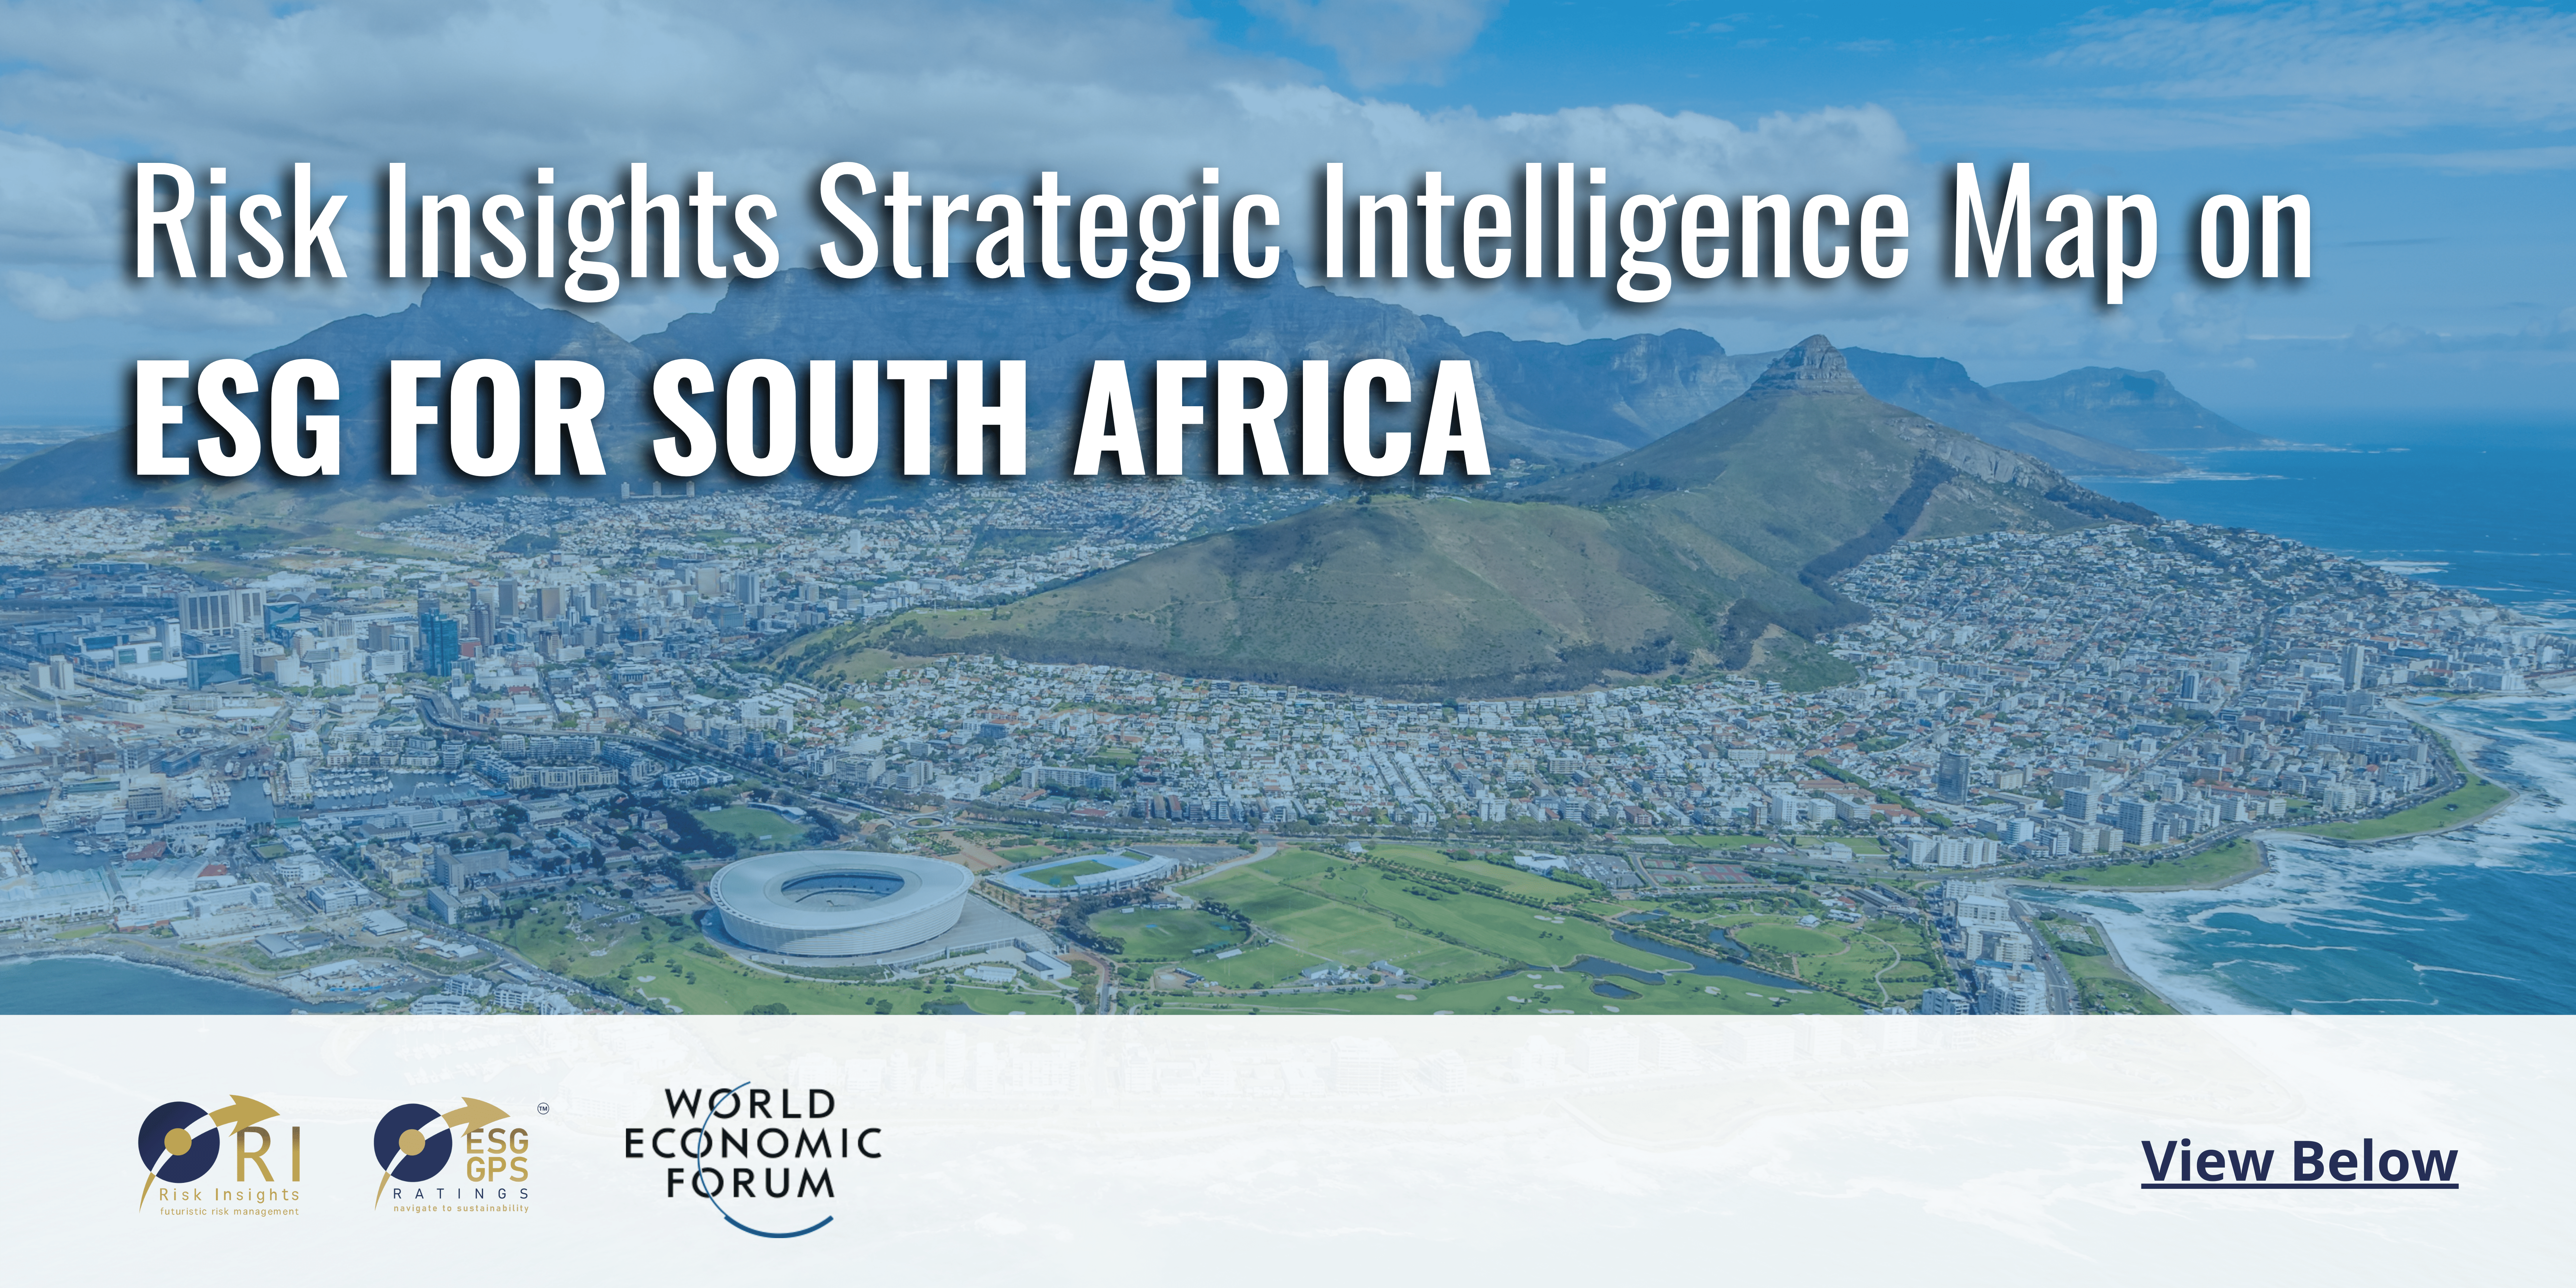 Risk Insights Strategic Intelligence Map on ESG for South Africa